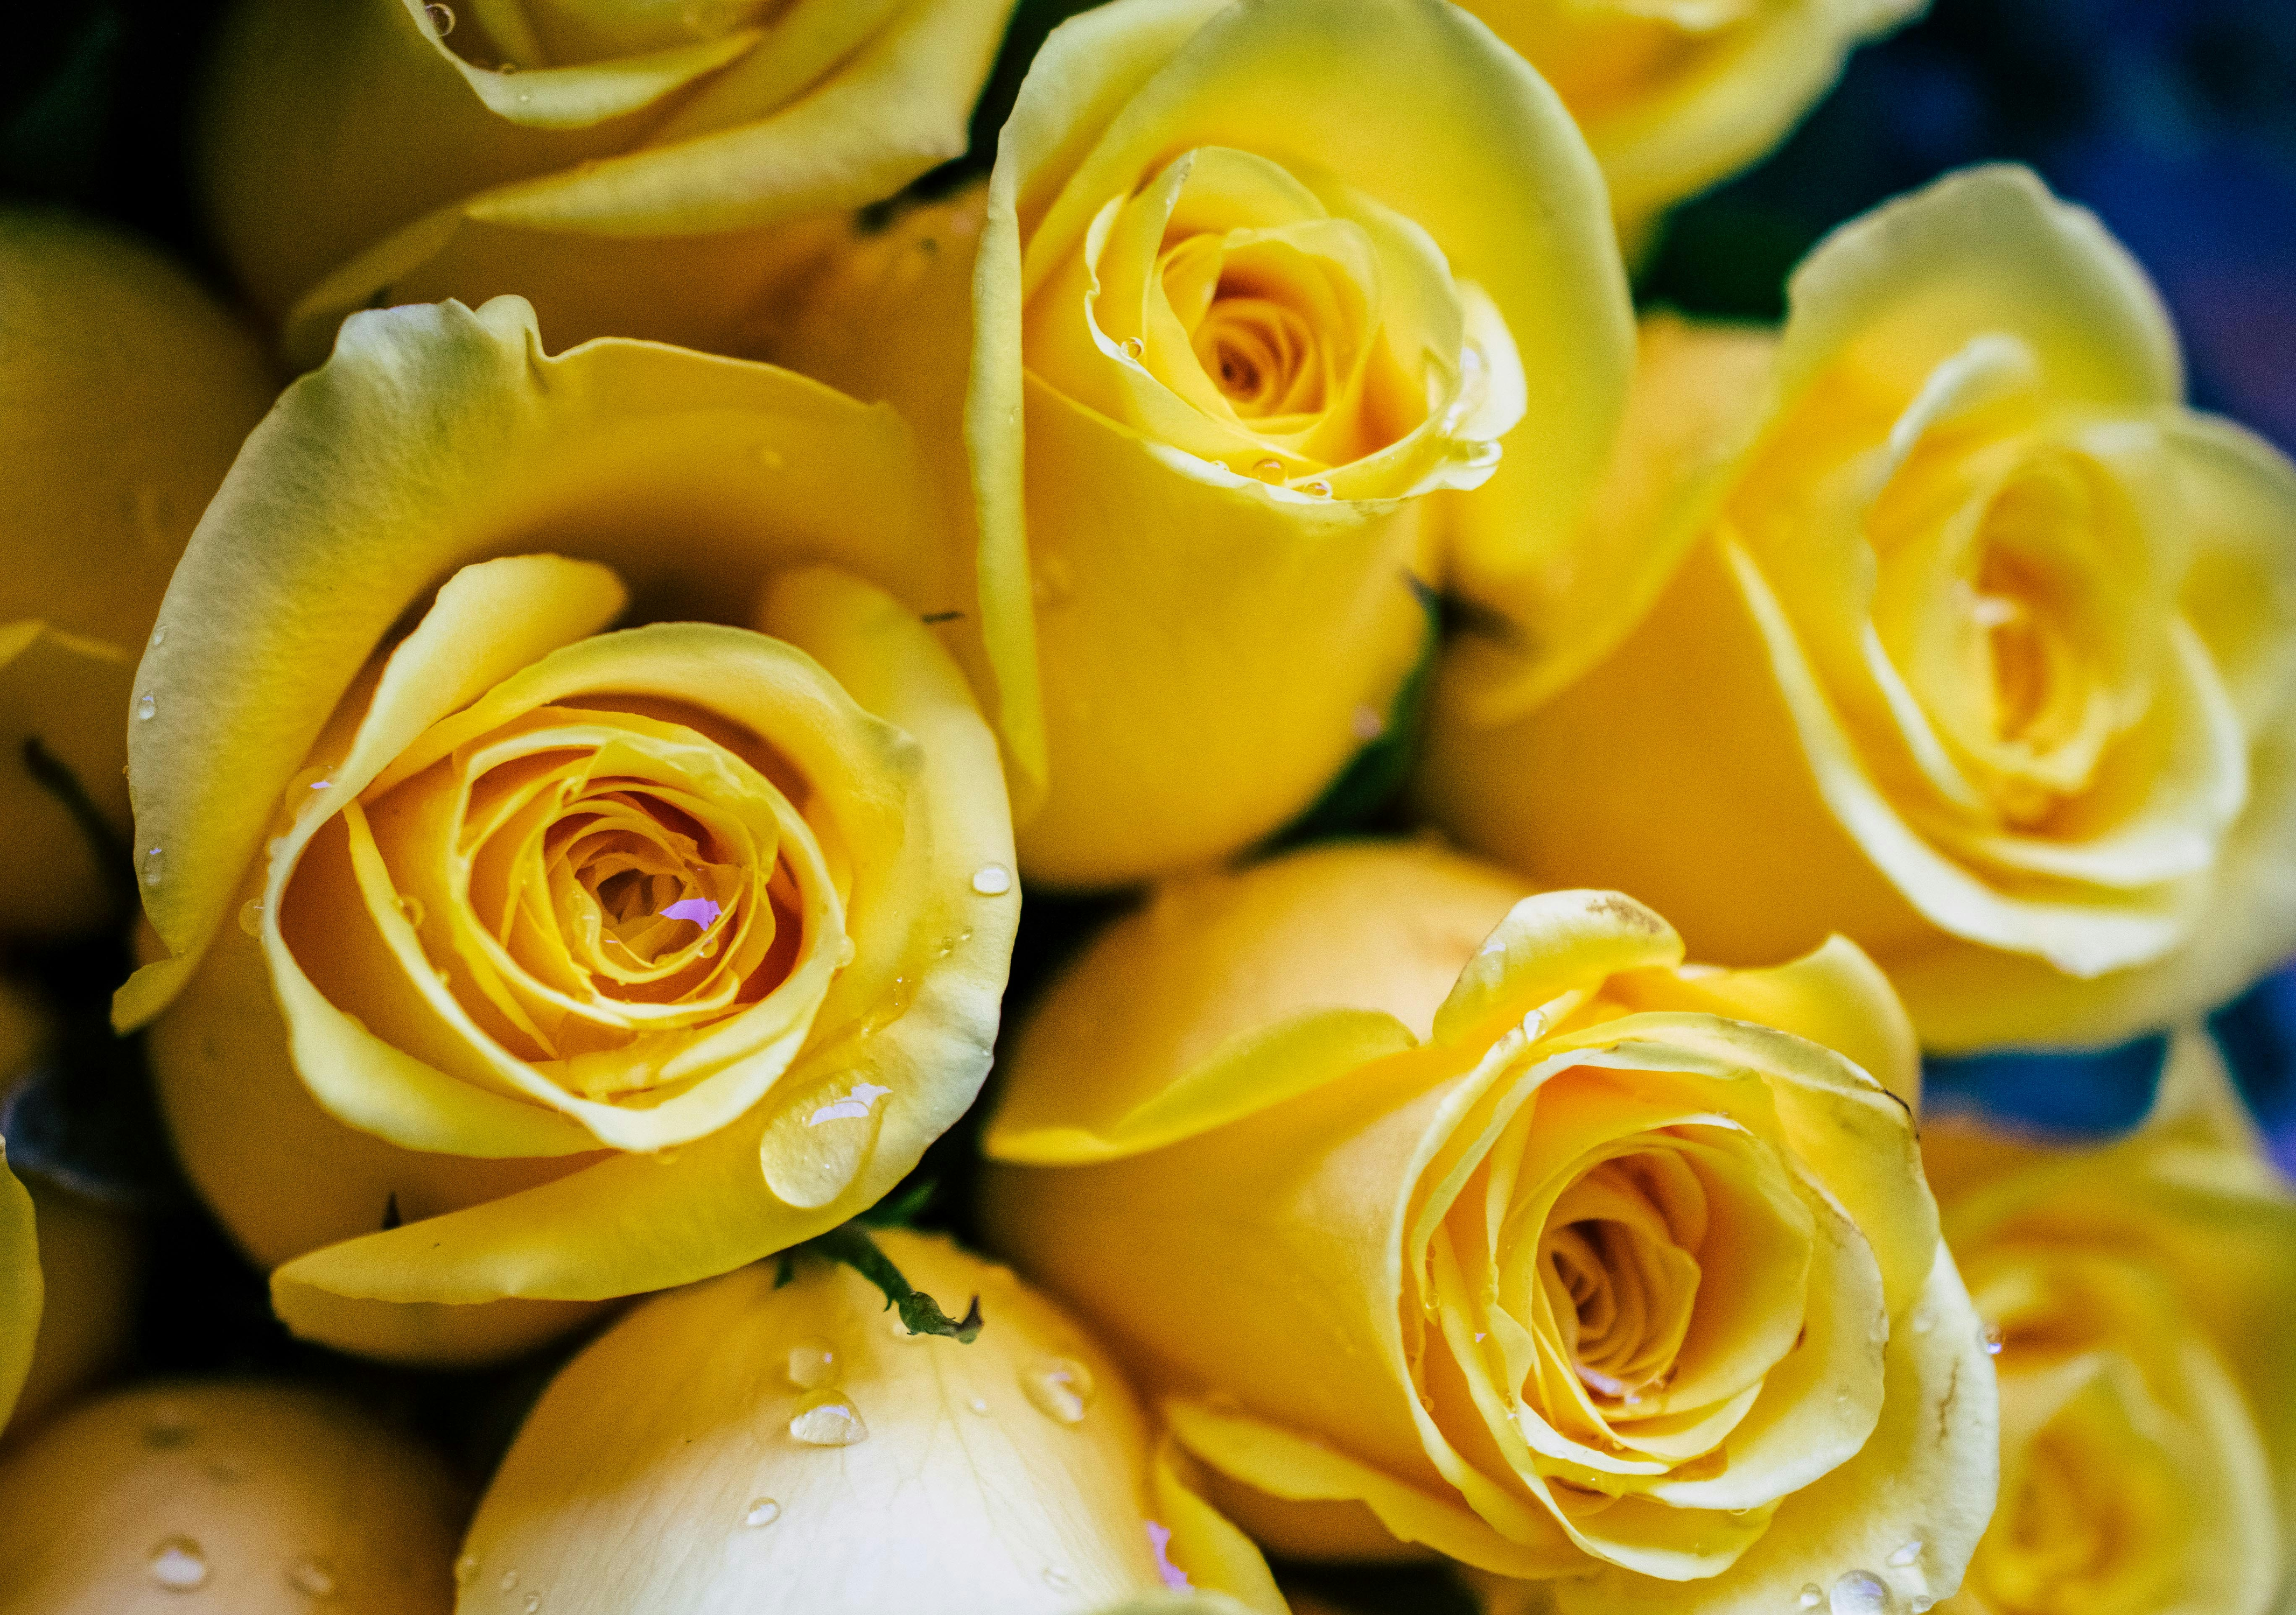 The Yellow Rose Problem